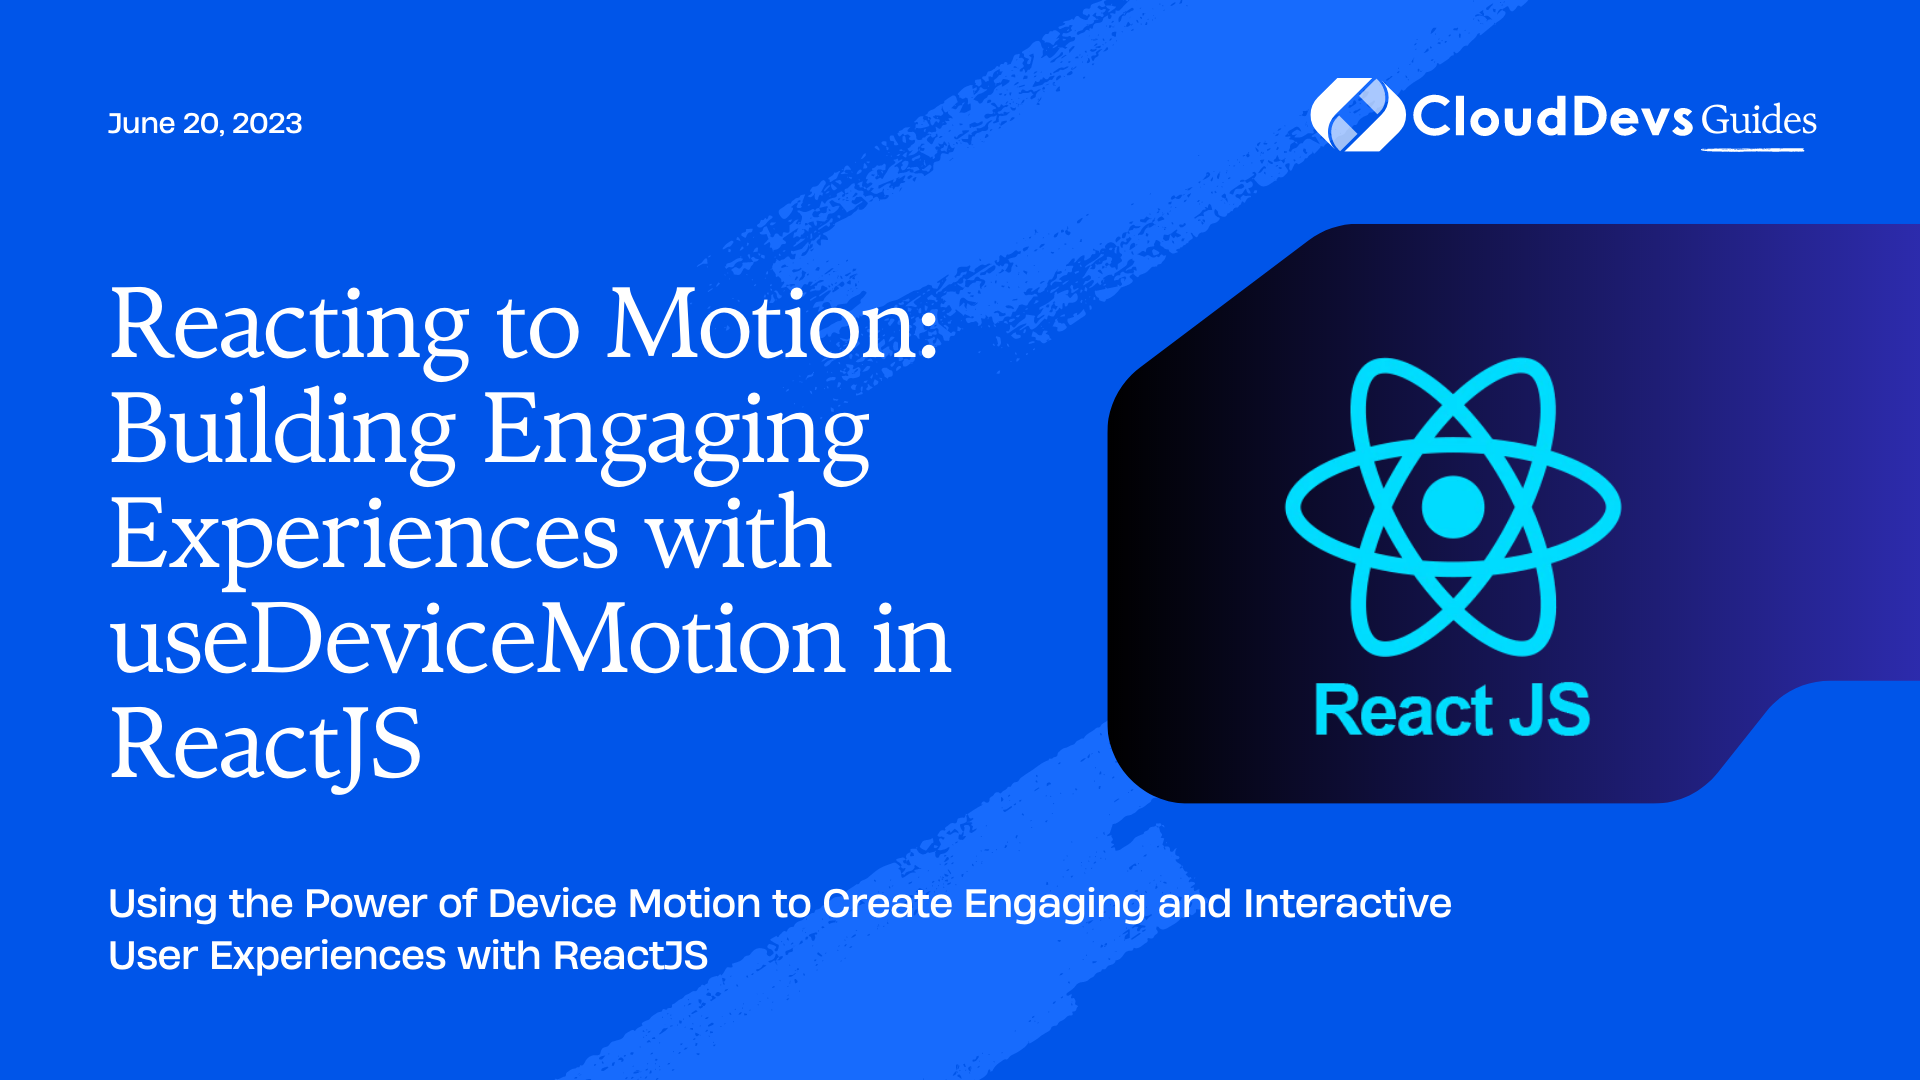 Reacting to Motion: Building Engaging Experiences with useDeviceMotion in ReactJS